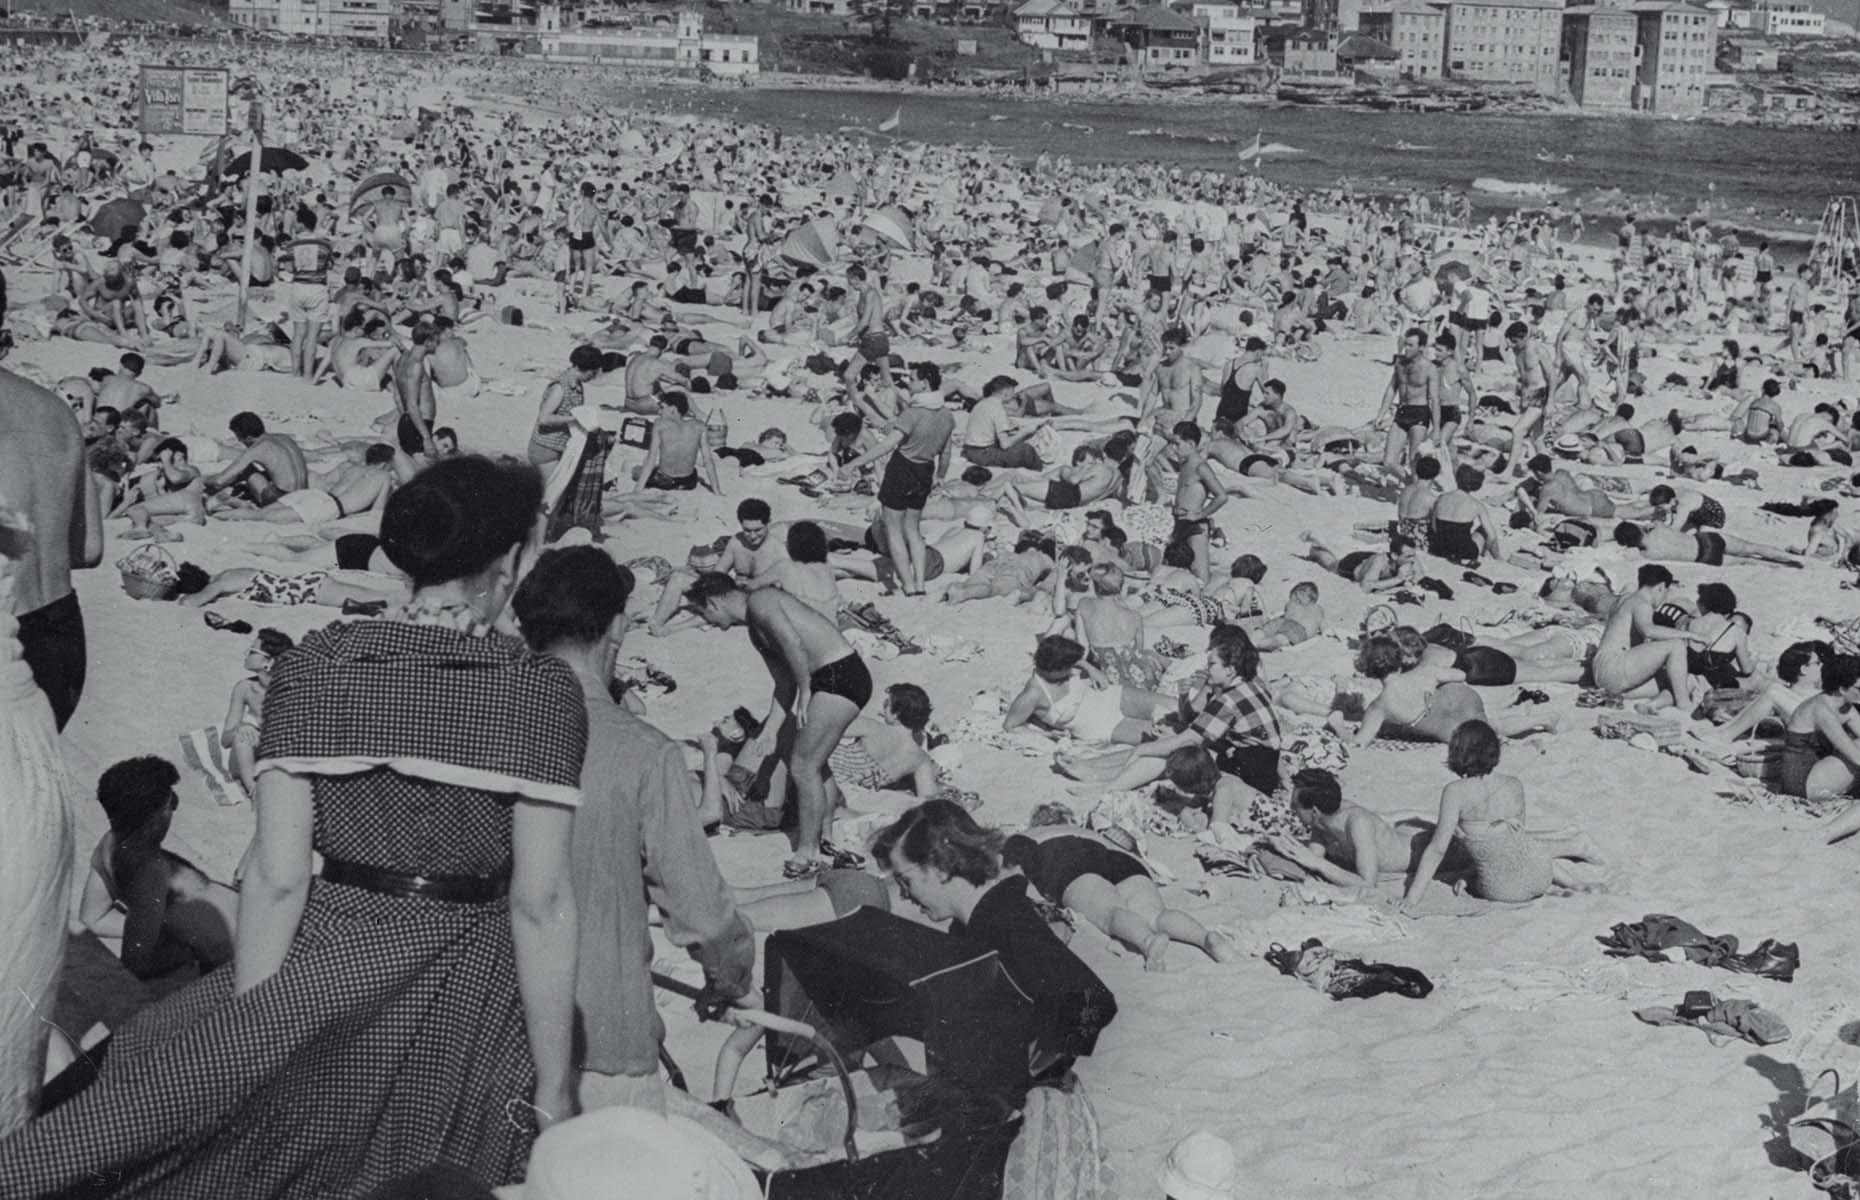 By the mid-20th century, Bondi was already famous beyond the shores of Australia and became a must-visit for anyone spending time in Sydney. As crowds packed the sands, as pictured in this snap from the 1950s, there were strict controls in place for appropriate beach attire. Between 1935 and 1961 beach inspectors would patrol the sands in a bid to maintain decency. Swimming costumes had to meet certain requirements, including strict size dimensions, and any offenders were escorted off the beach.